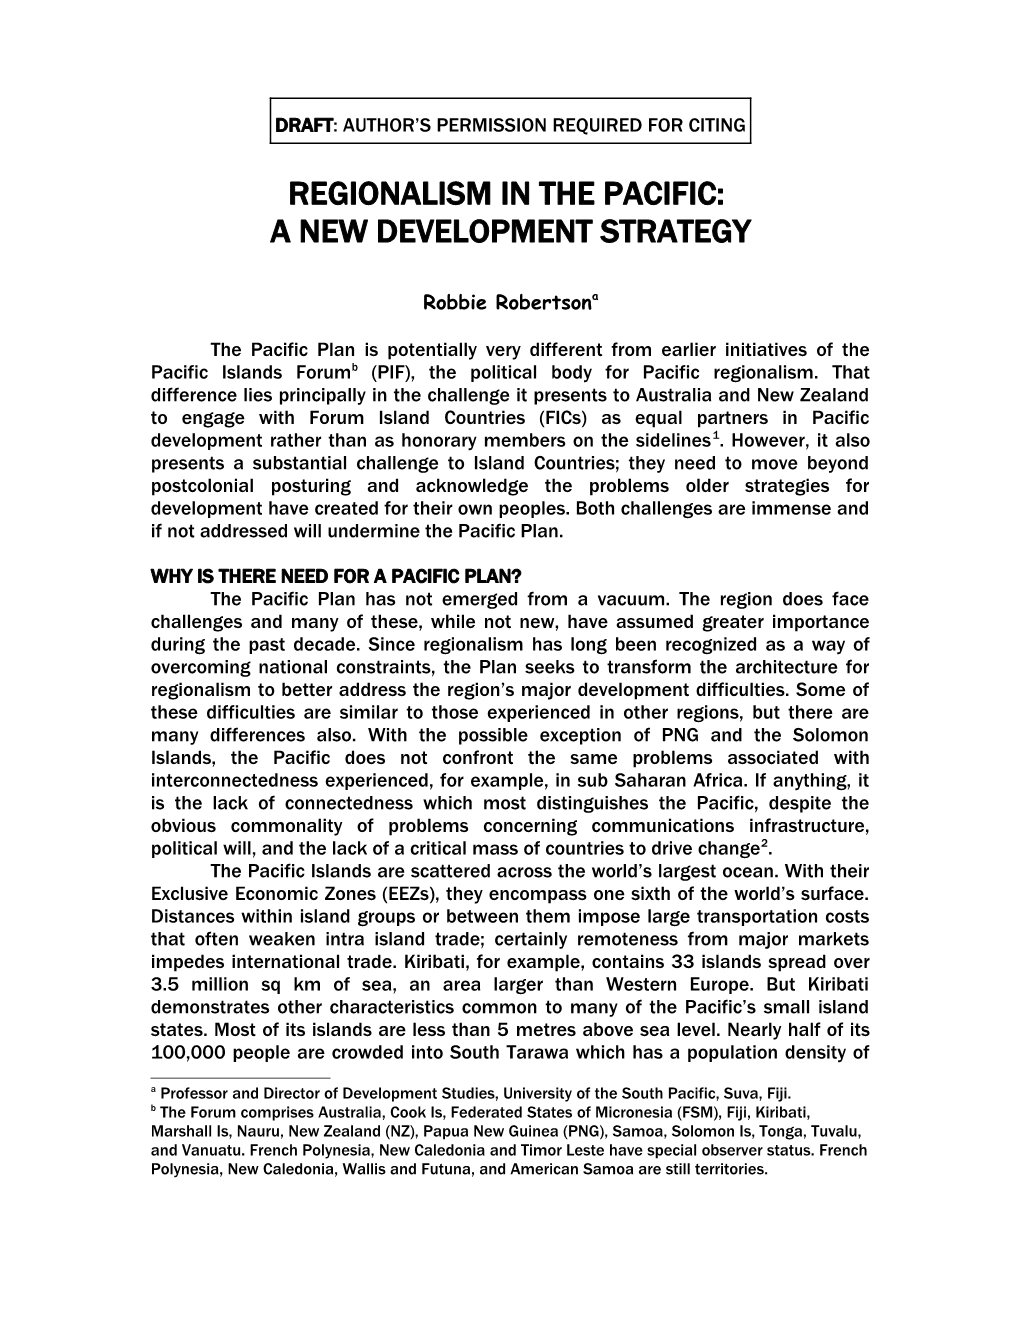 Regionalism in the Pacific